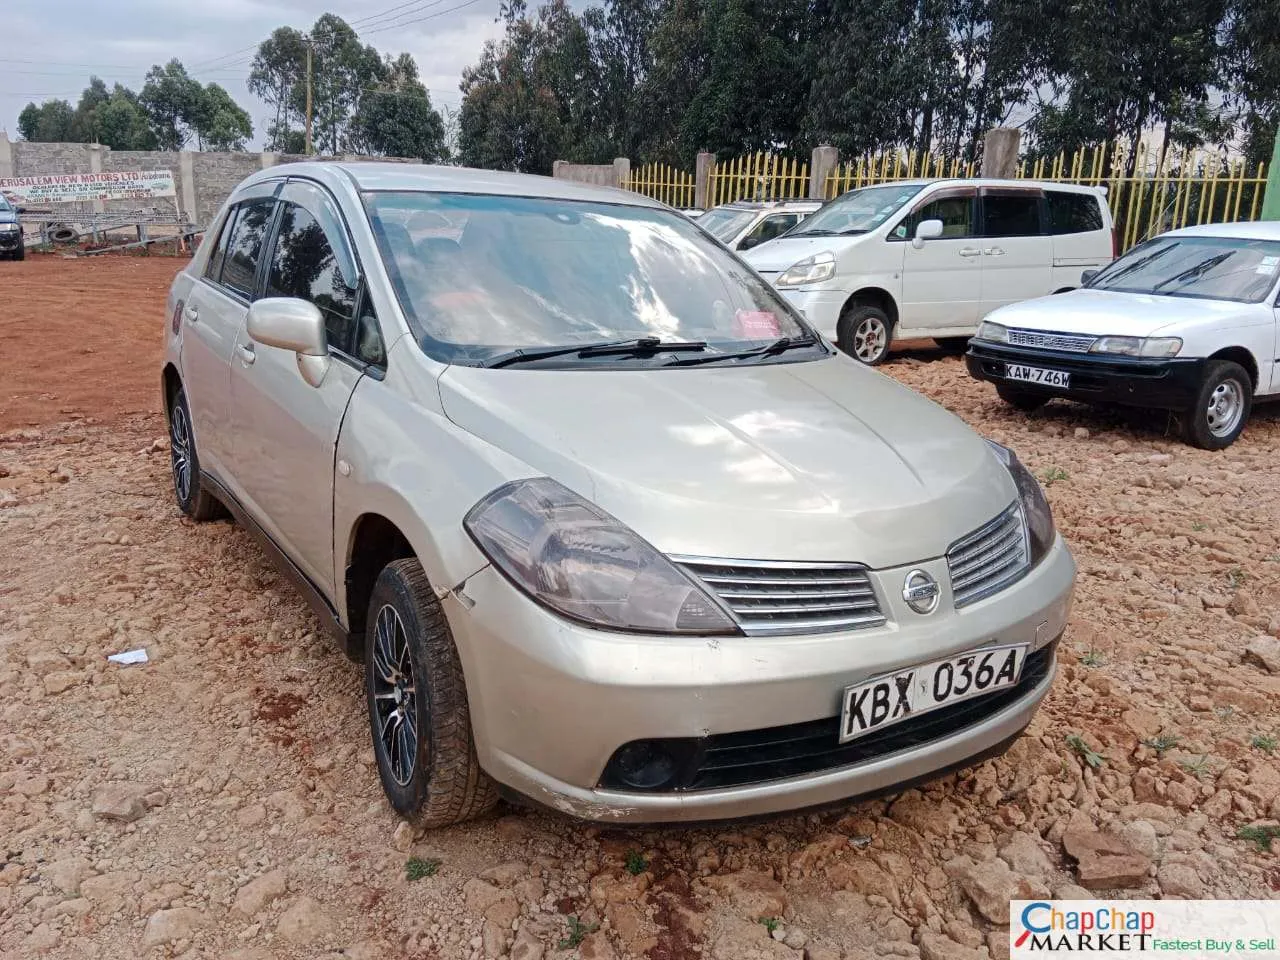 Nissan Tiida kenya 270K ONLY You Pay 35% Deposit Trade in Ok tiida for sale in kenya hire purchase installments EXCLUSIVE latio saloon (SOLD)